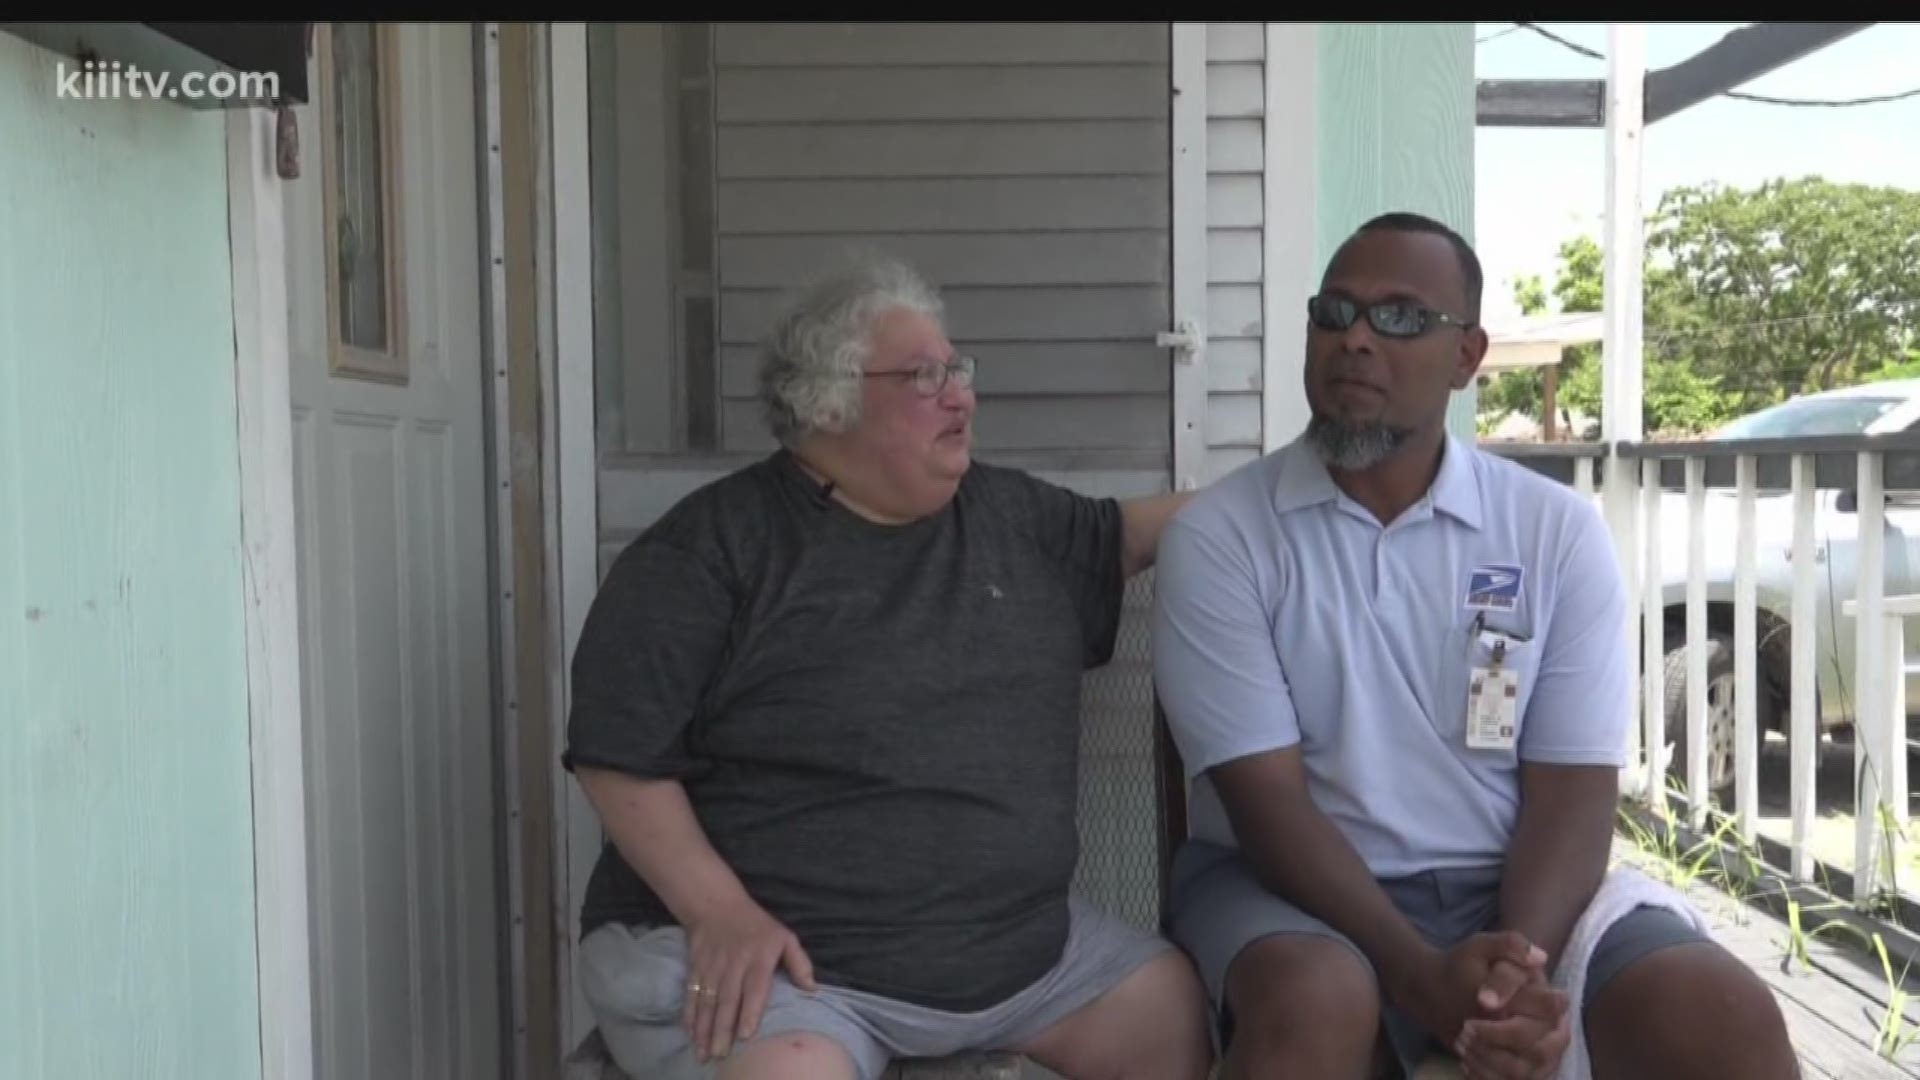 A recent medical emergency created a bond between a local woman and her neighborhood mail carrier.